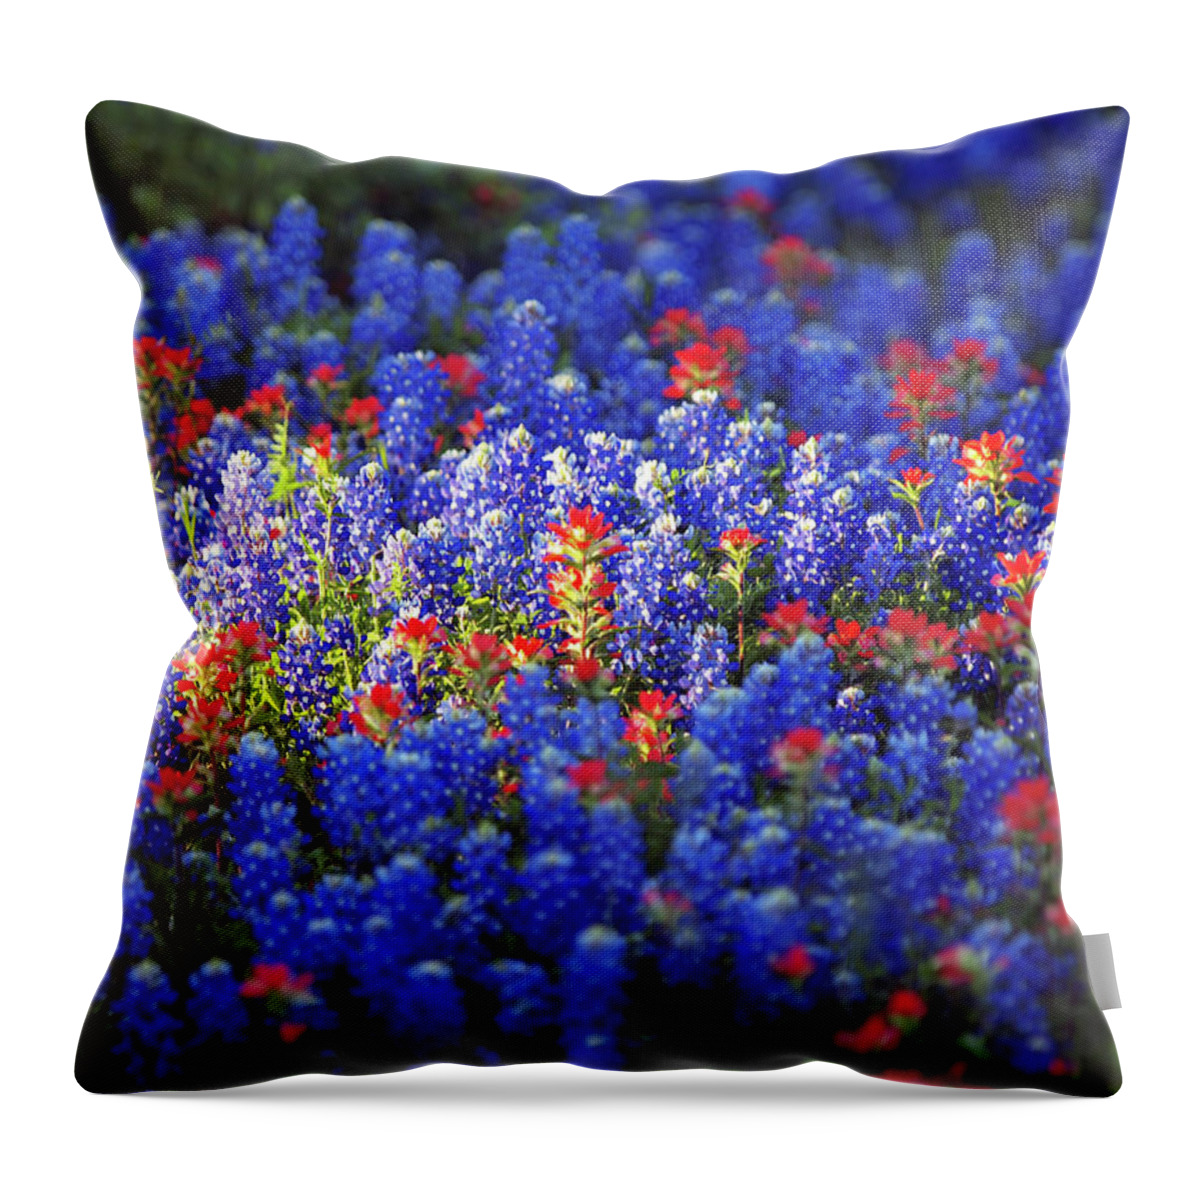 Bluebonnet Throw Pillow featuring the photograph Bluebonnets And Indian Paintbrush Wild by Sandra L. Grimm